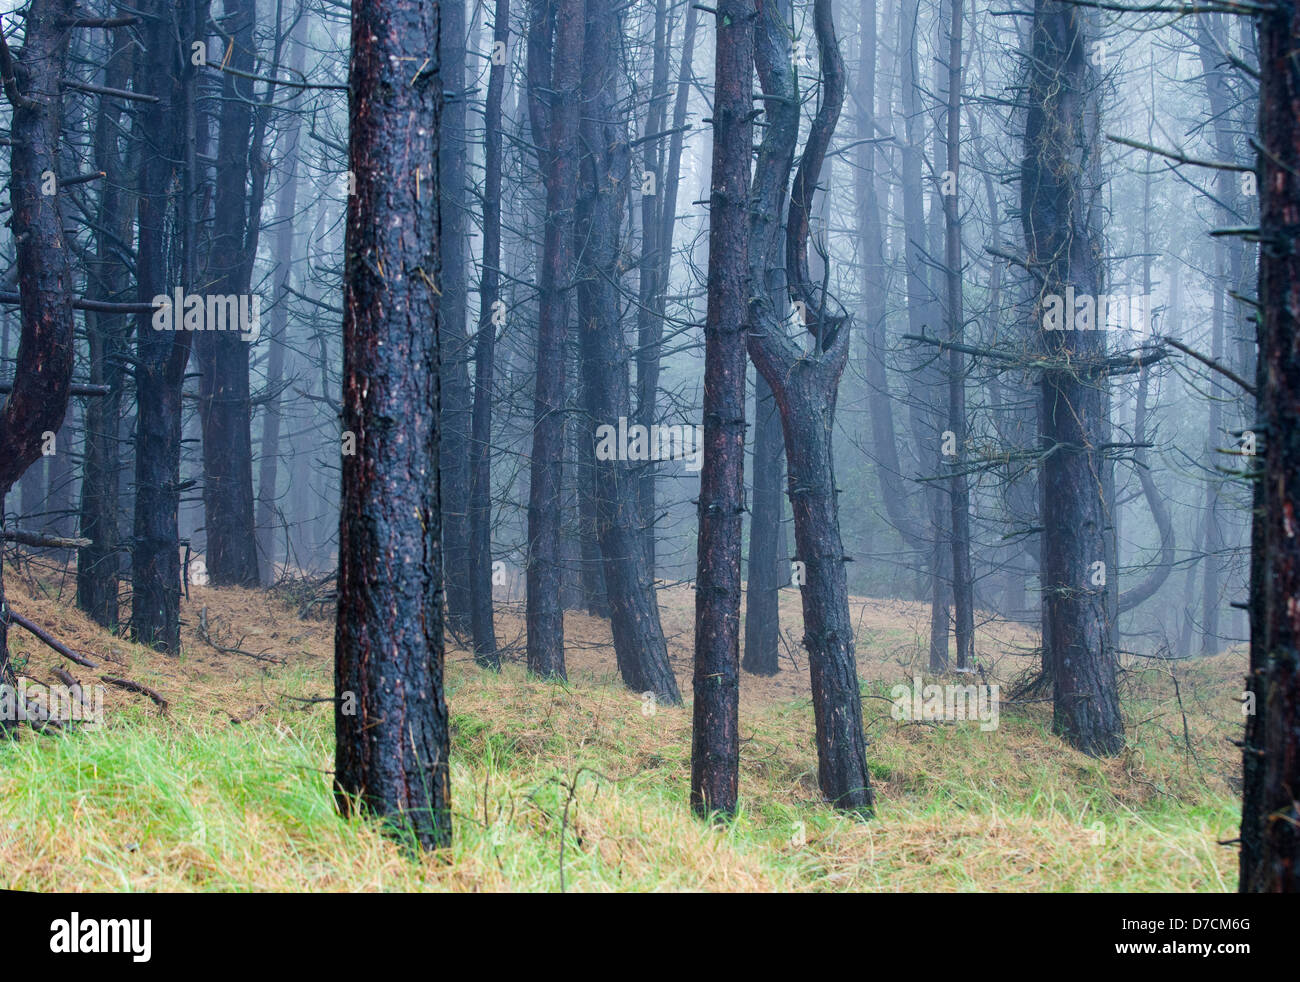 Mature conifer woodland in wet misty conditions Stock Photo